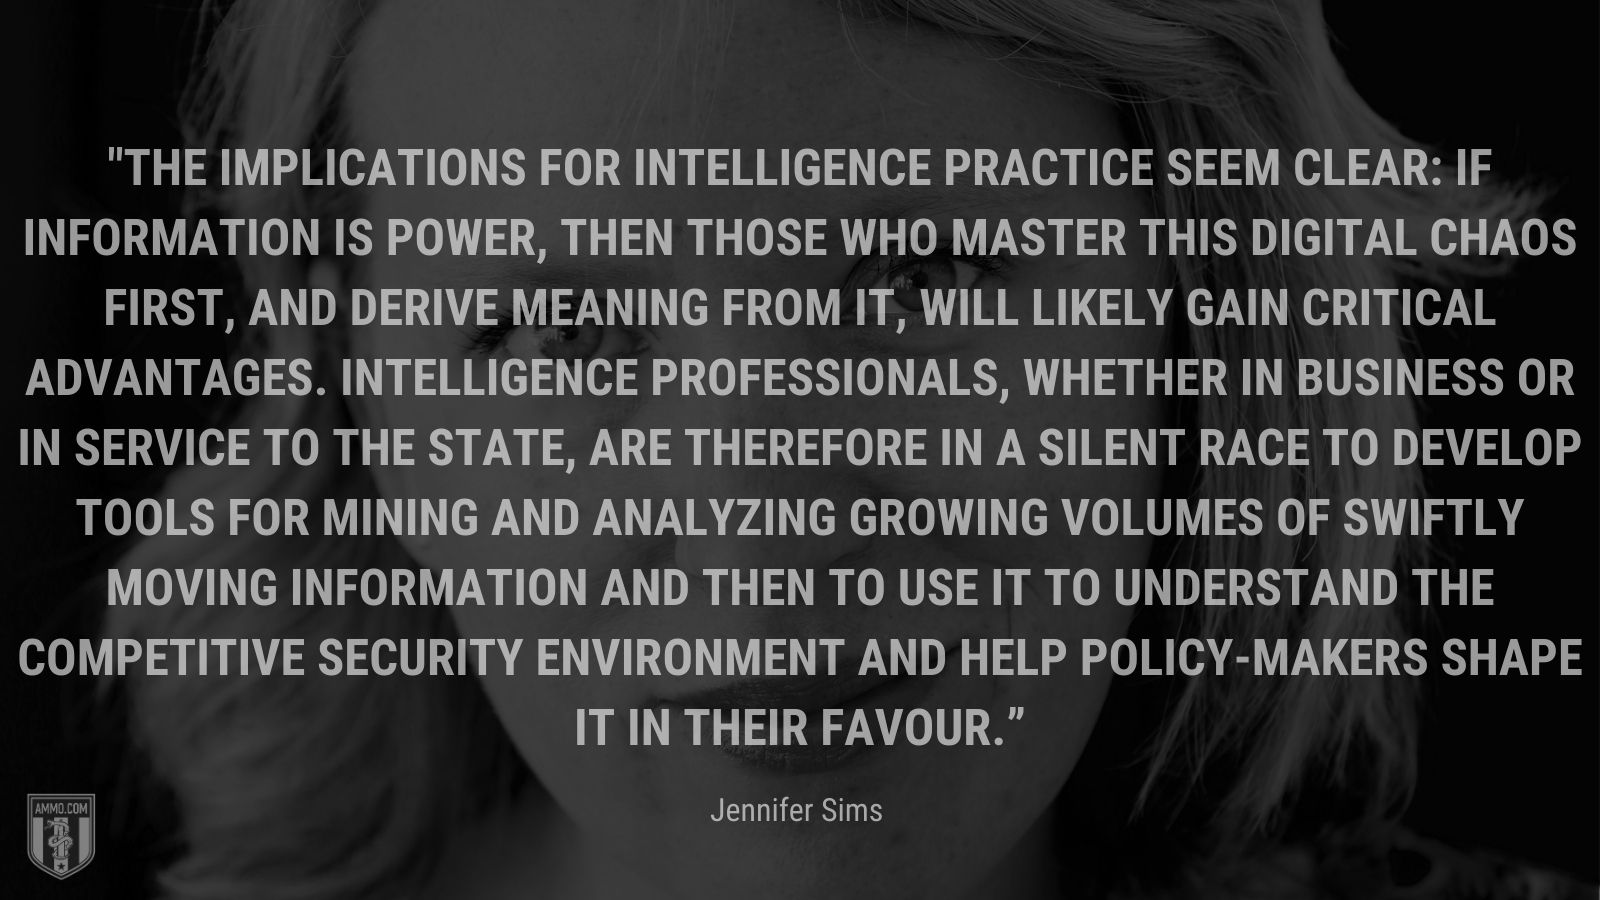 “The implications for intelligence practice seem clear: if information is power, then those who master this digital chaos first, and derive meaning from it, will likely gain critical advantages. Intelligence professionals, whether in business or in service to the state, are therefore in a silent race to develop tools for mining and analyzing growing volumes of swiftly moving information and then to use it to understand the competitive security environment and help policy-makers shape it in their favour.” - Jennifer Sims